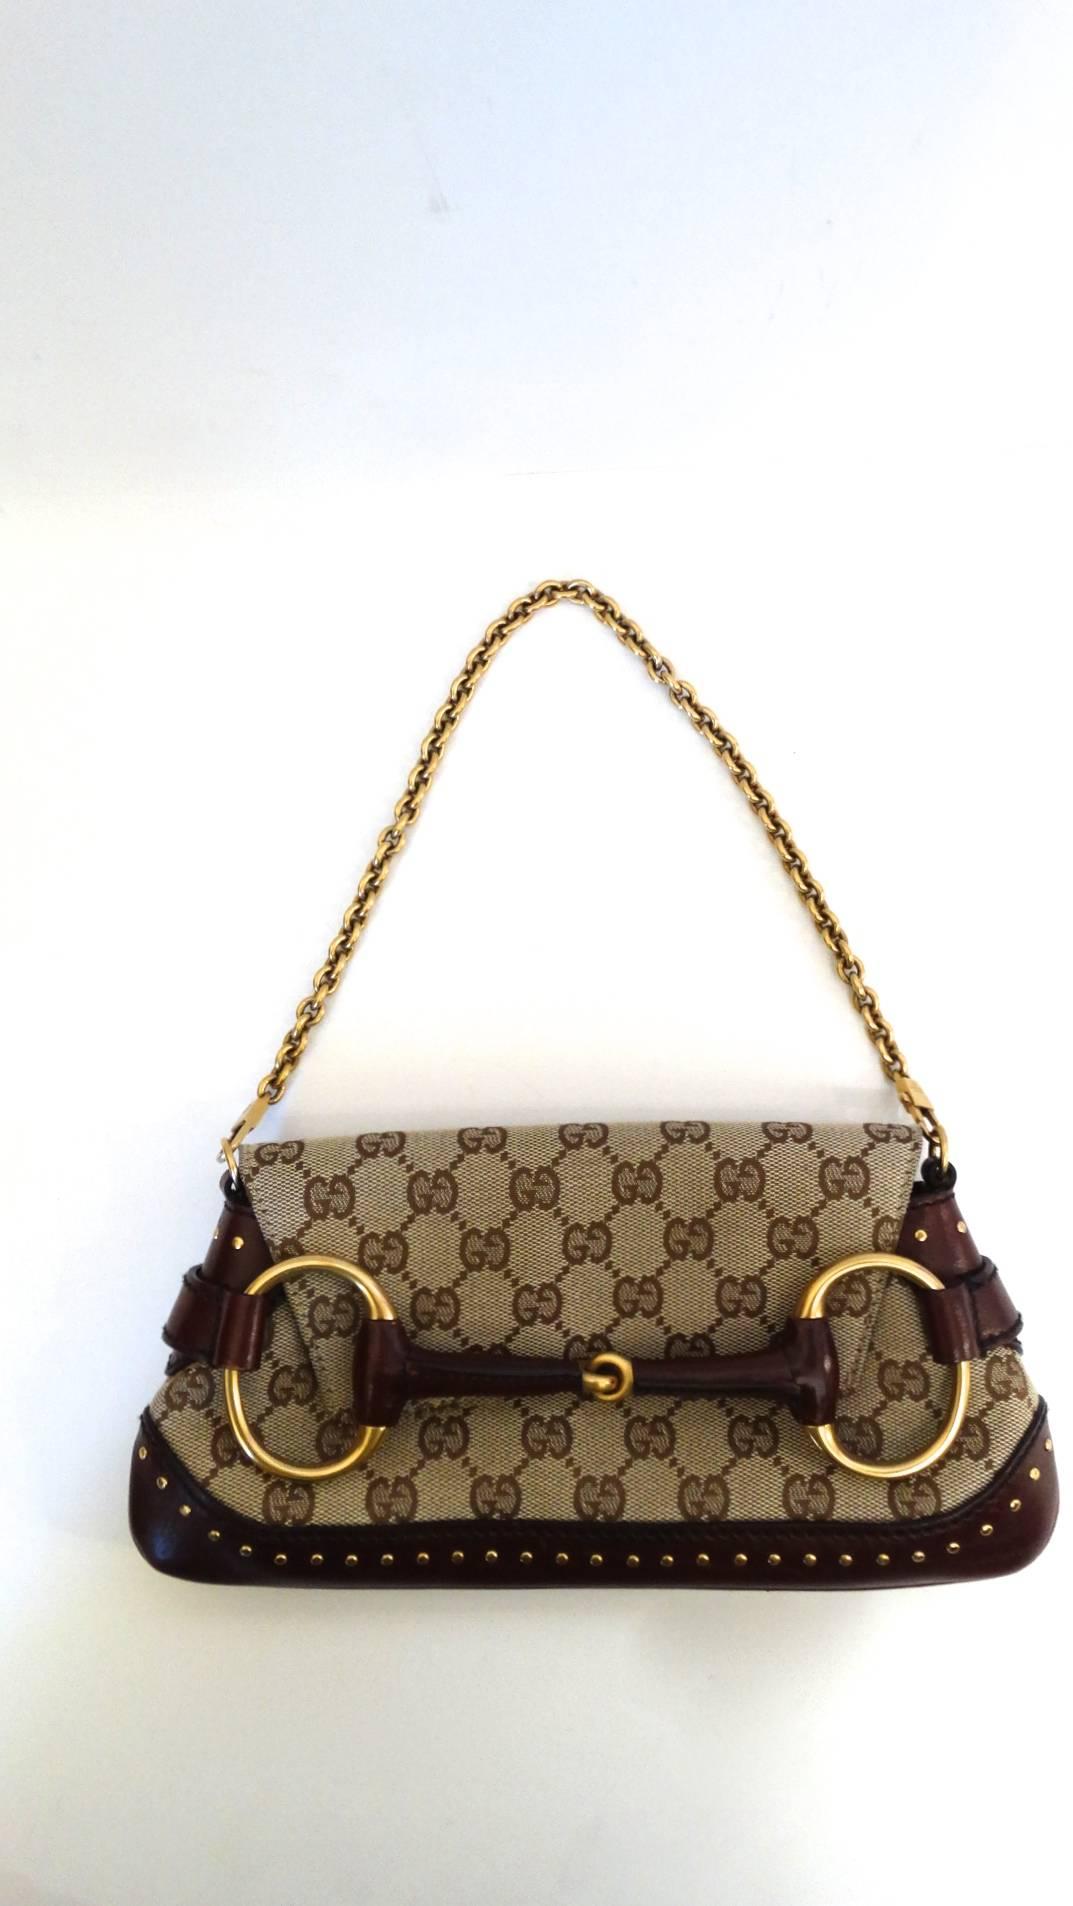 Tom Ford for Gucci, Gucci Monogram horsebit chain shoulder bag from their F/W collection circa 2003. Purse can be converted into a classic clutch with removable gold chain strap. Comes with dust bag. 

Length: 10